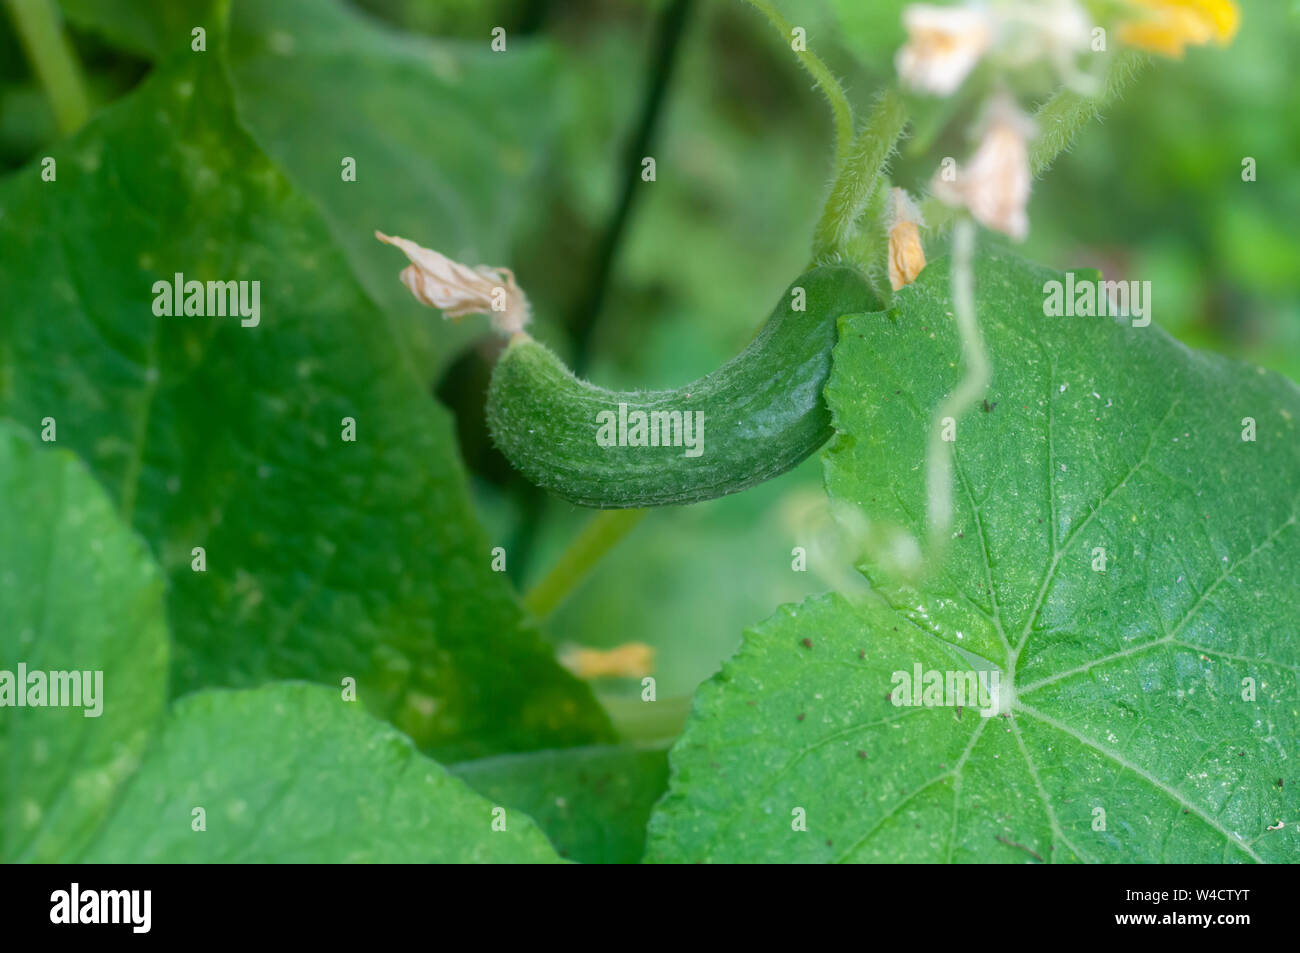 Full grown cucumber on a plant in an urban vegetable garden. Photographed in Israel in July Stock Photo